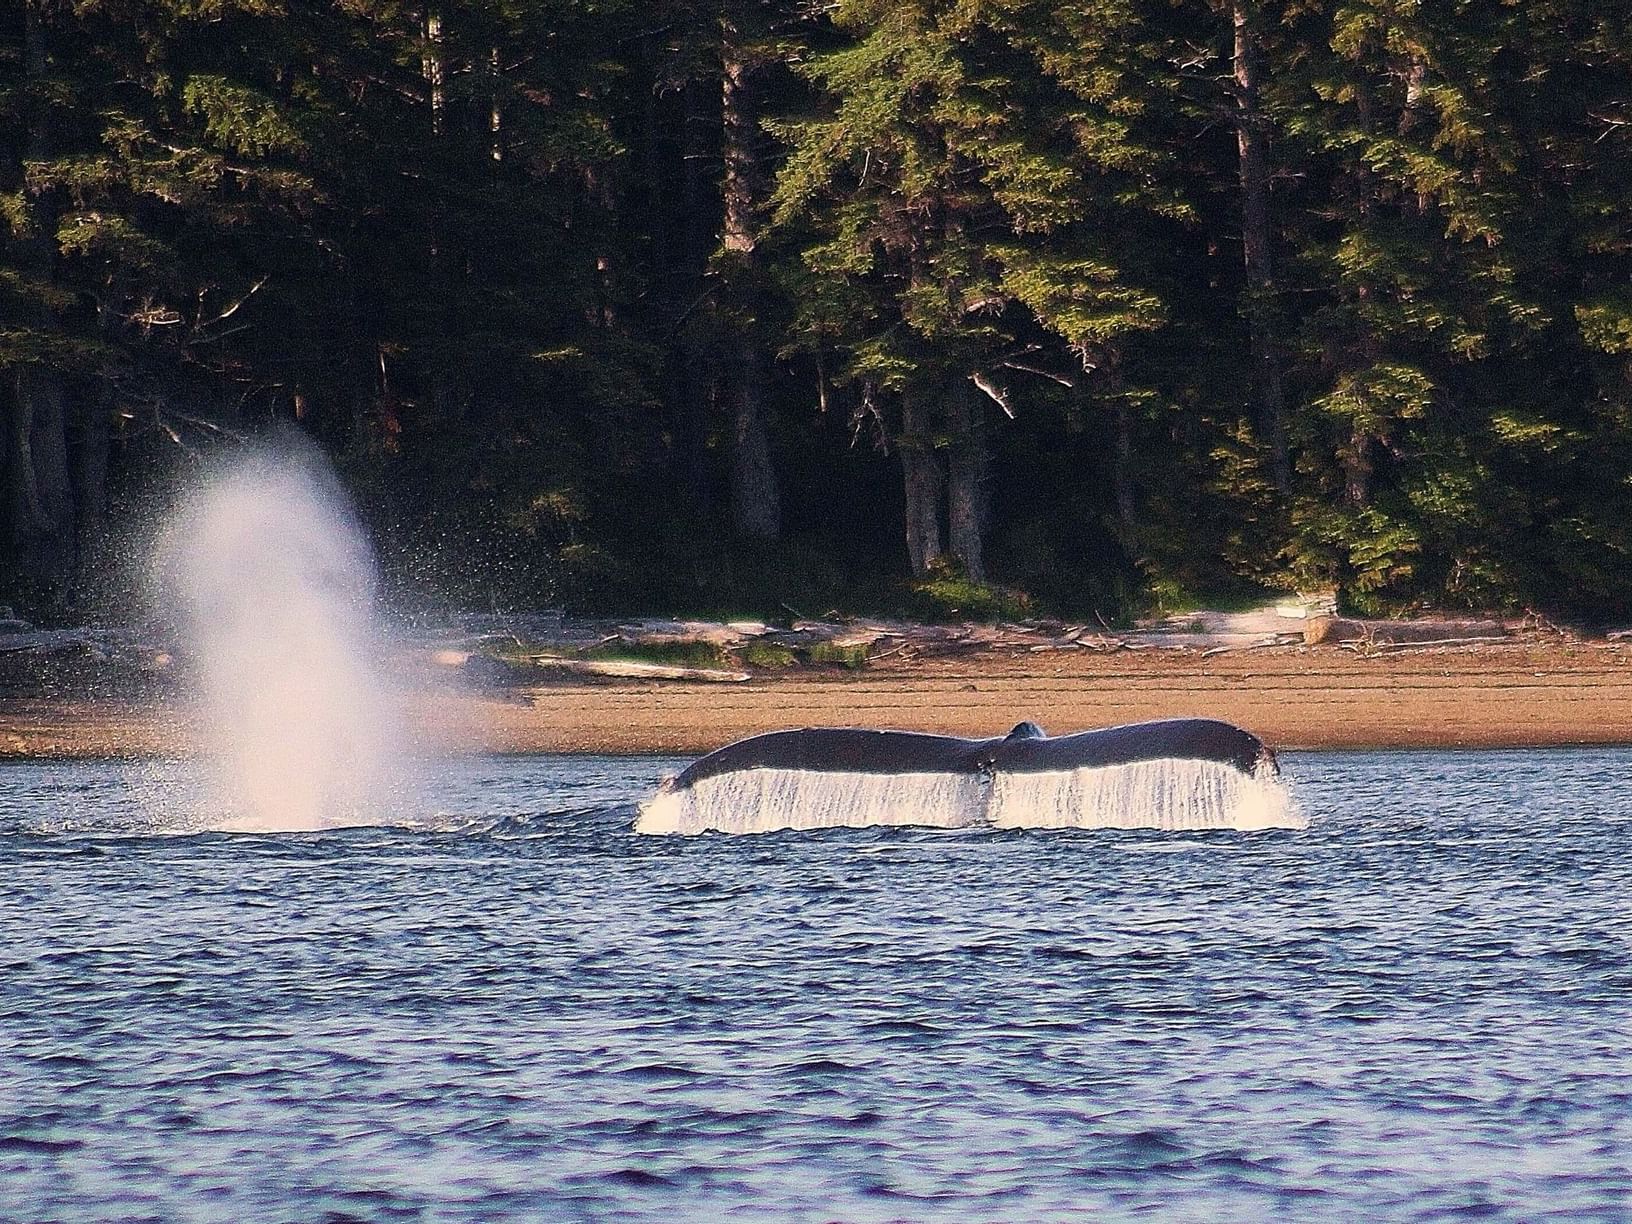 Whale tail fluke slapping on the water near The Landing Hotel  